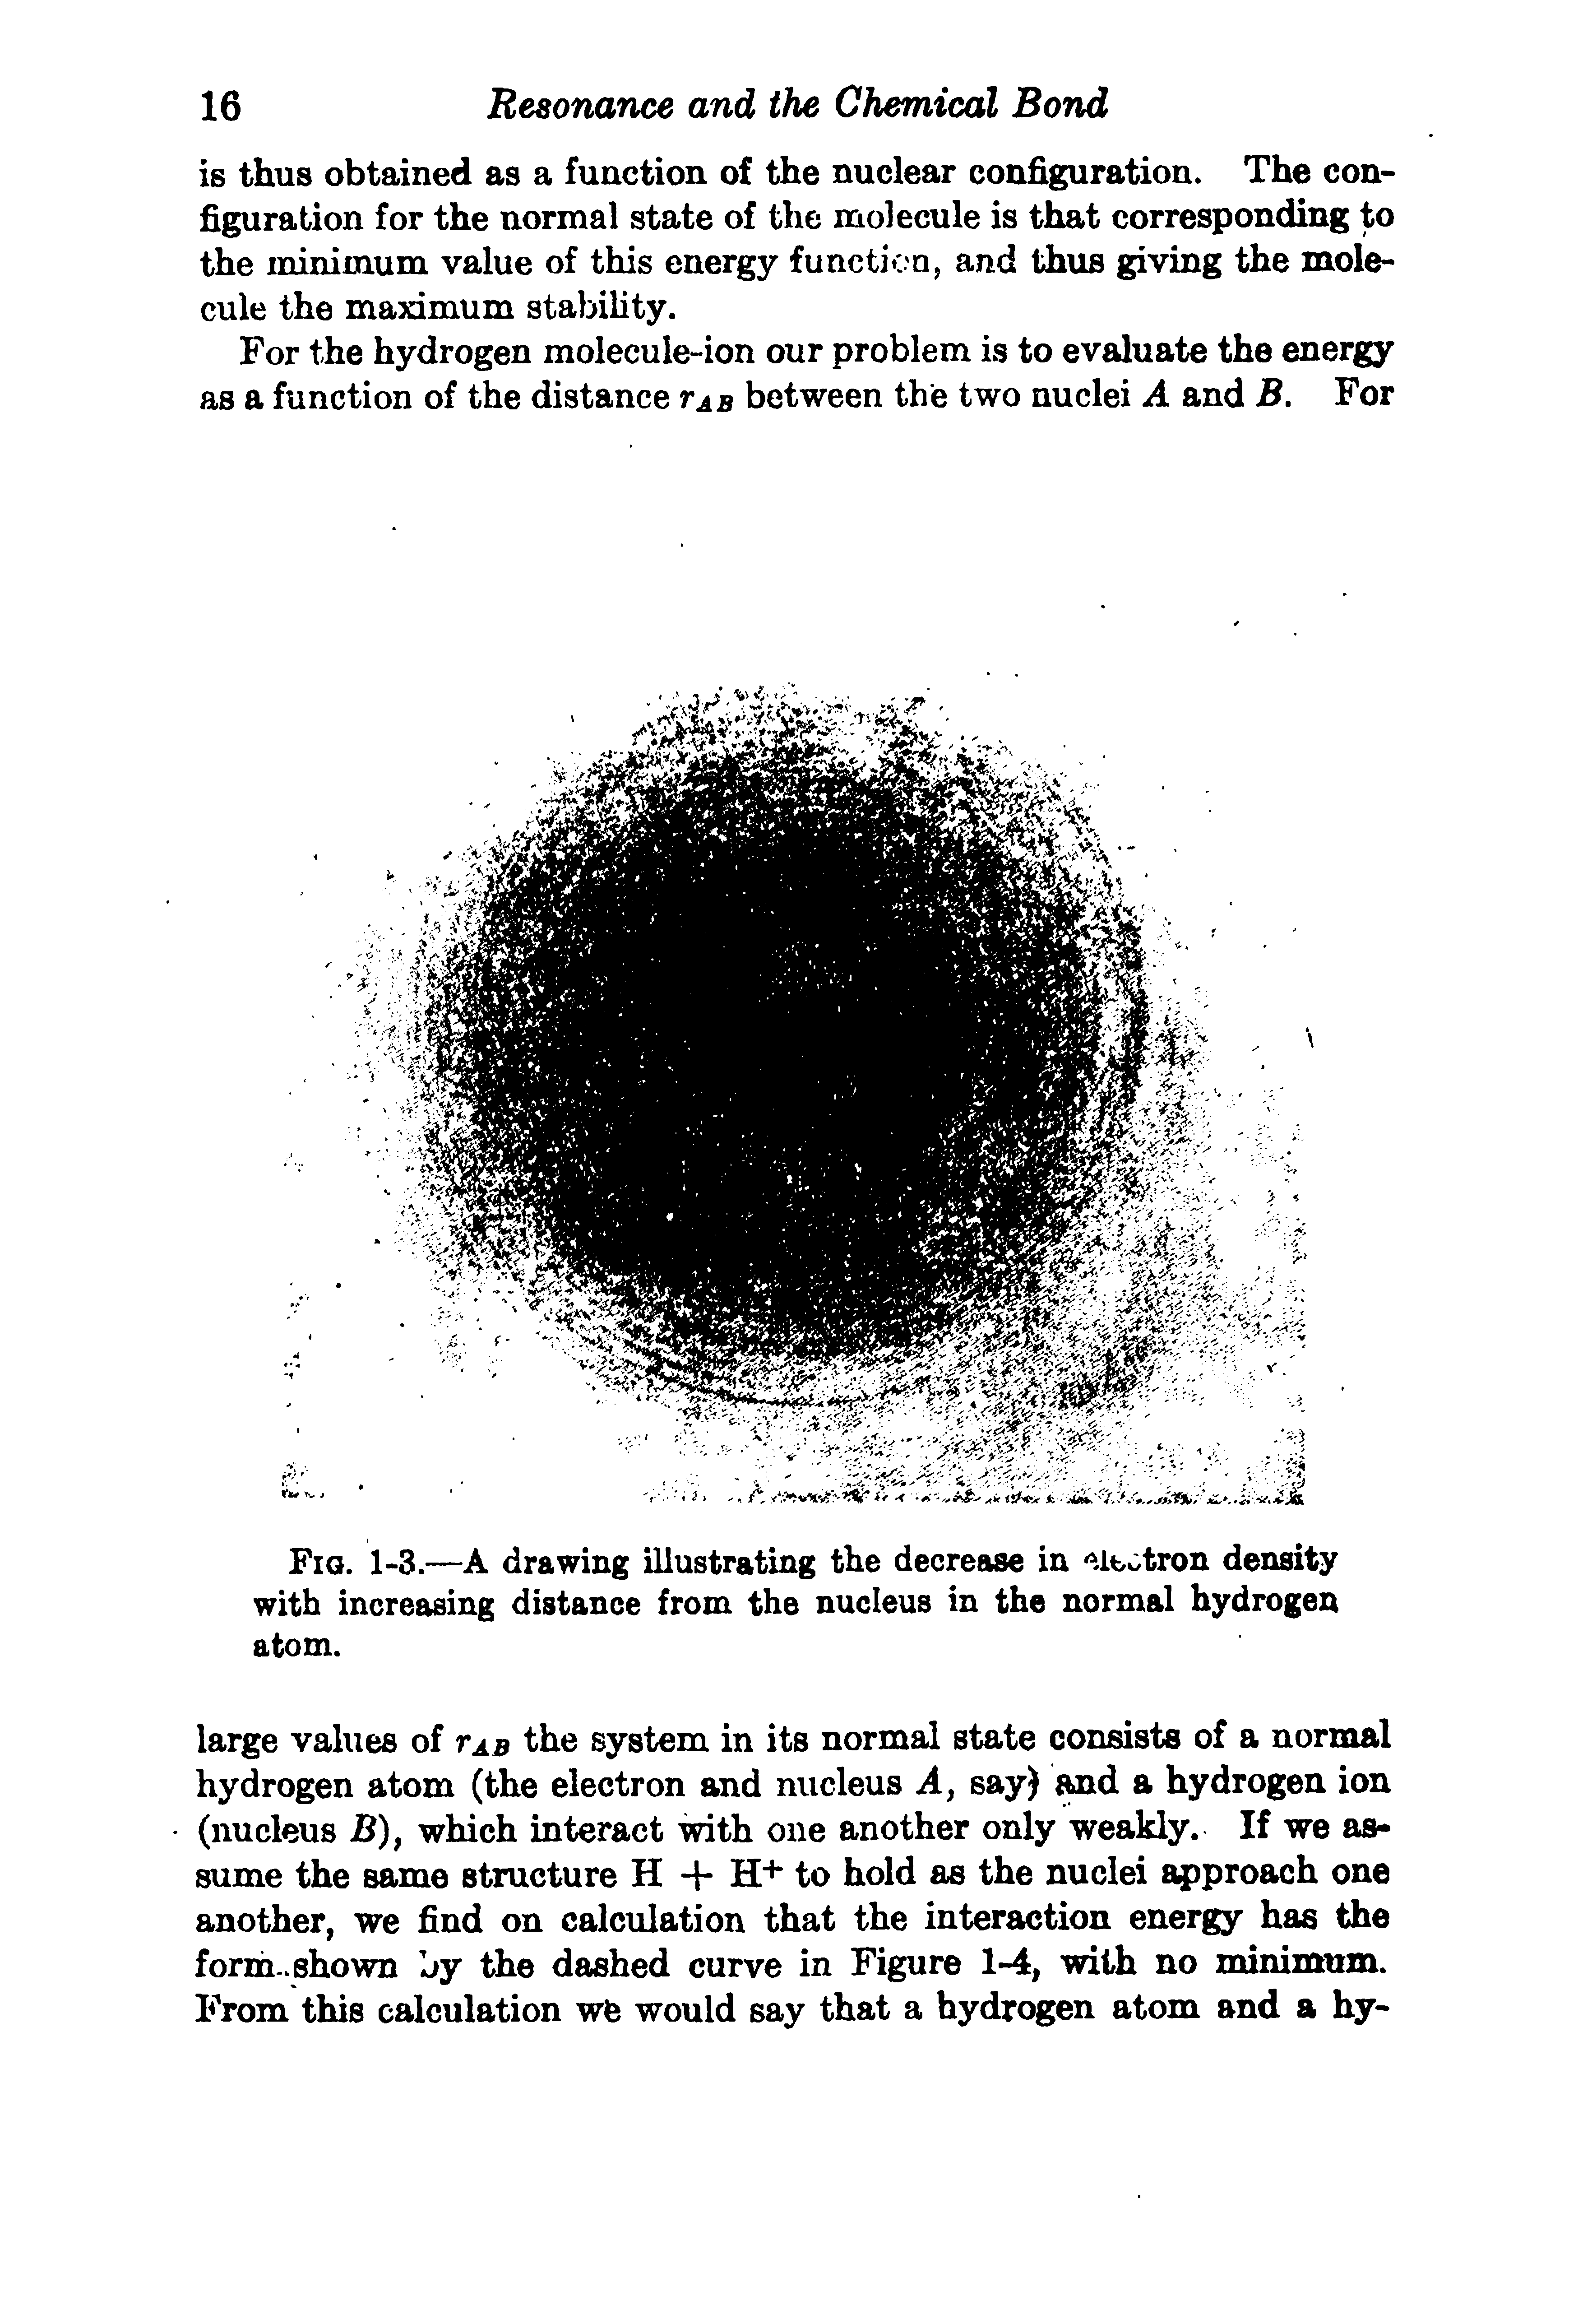 Fig. 1-3.—A drawing illustrating the decrease in Electron density with increasing distance from the nucleus in the normal hydrogen atom.